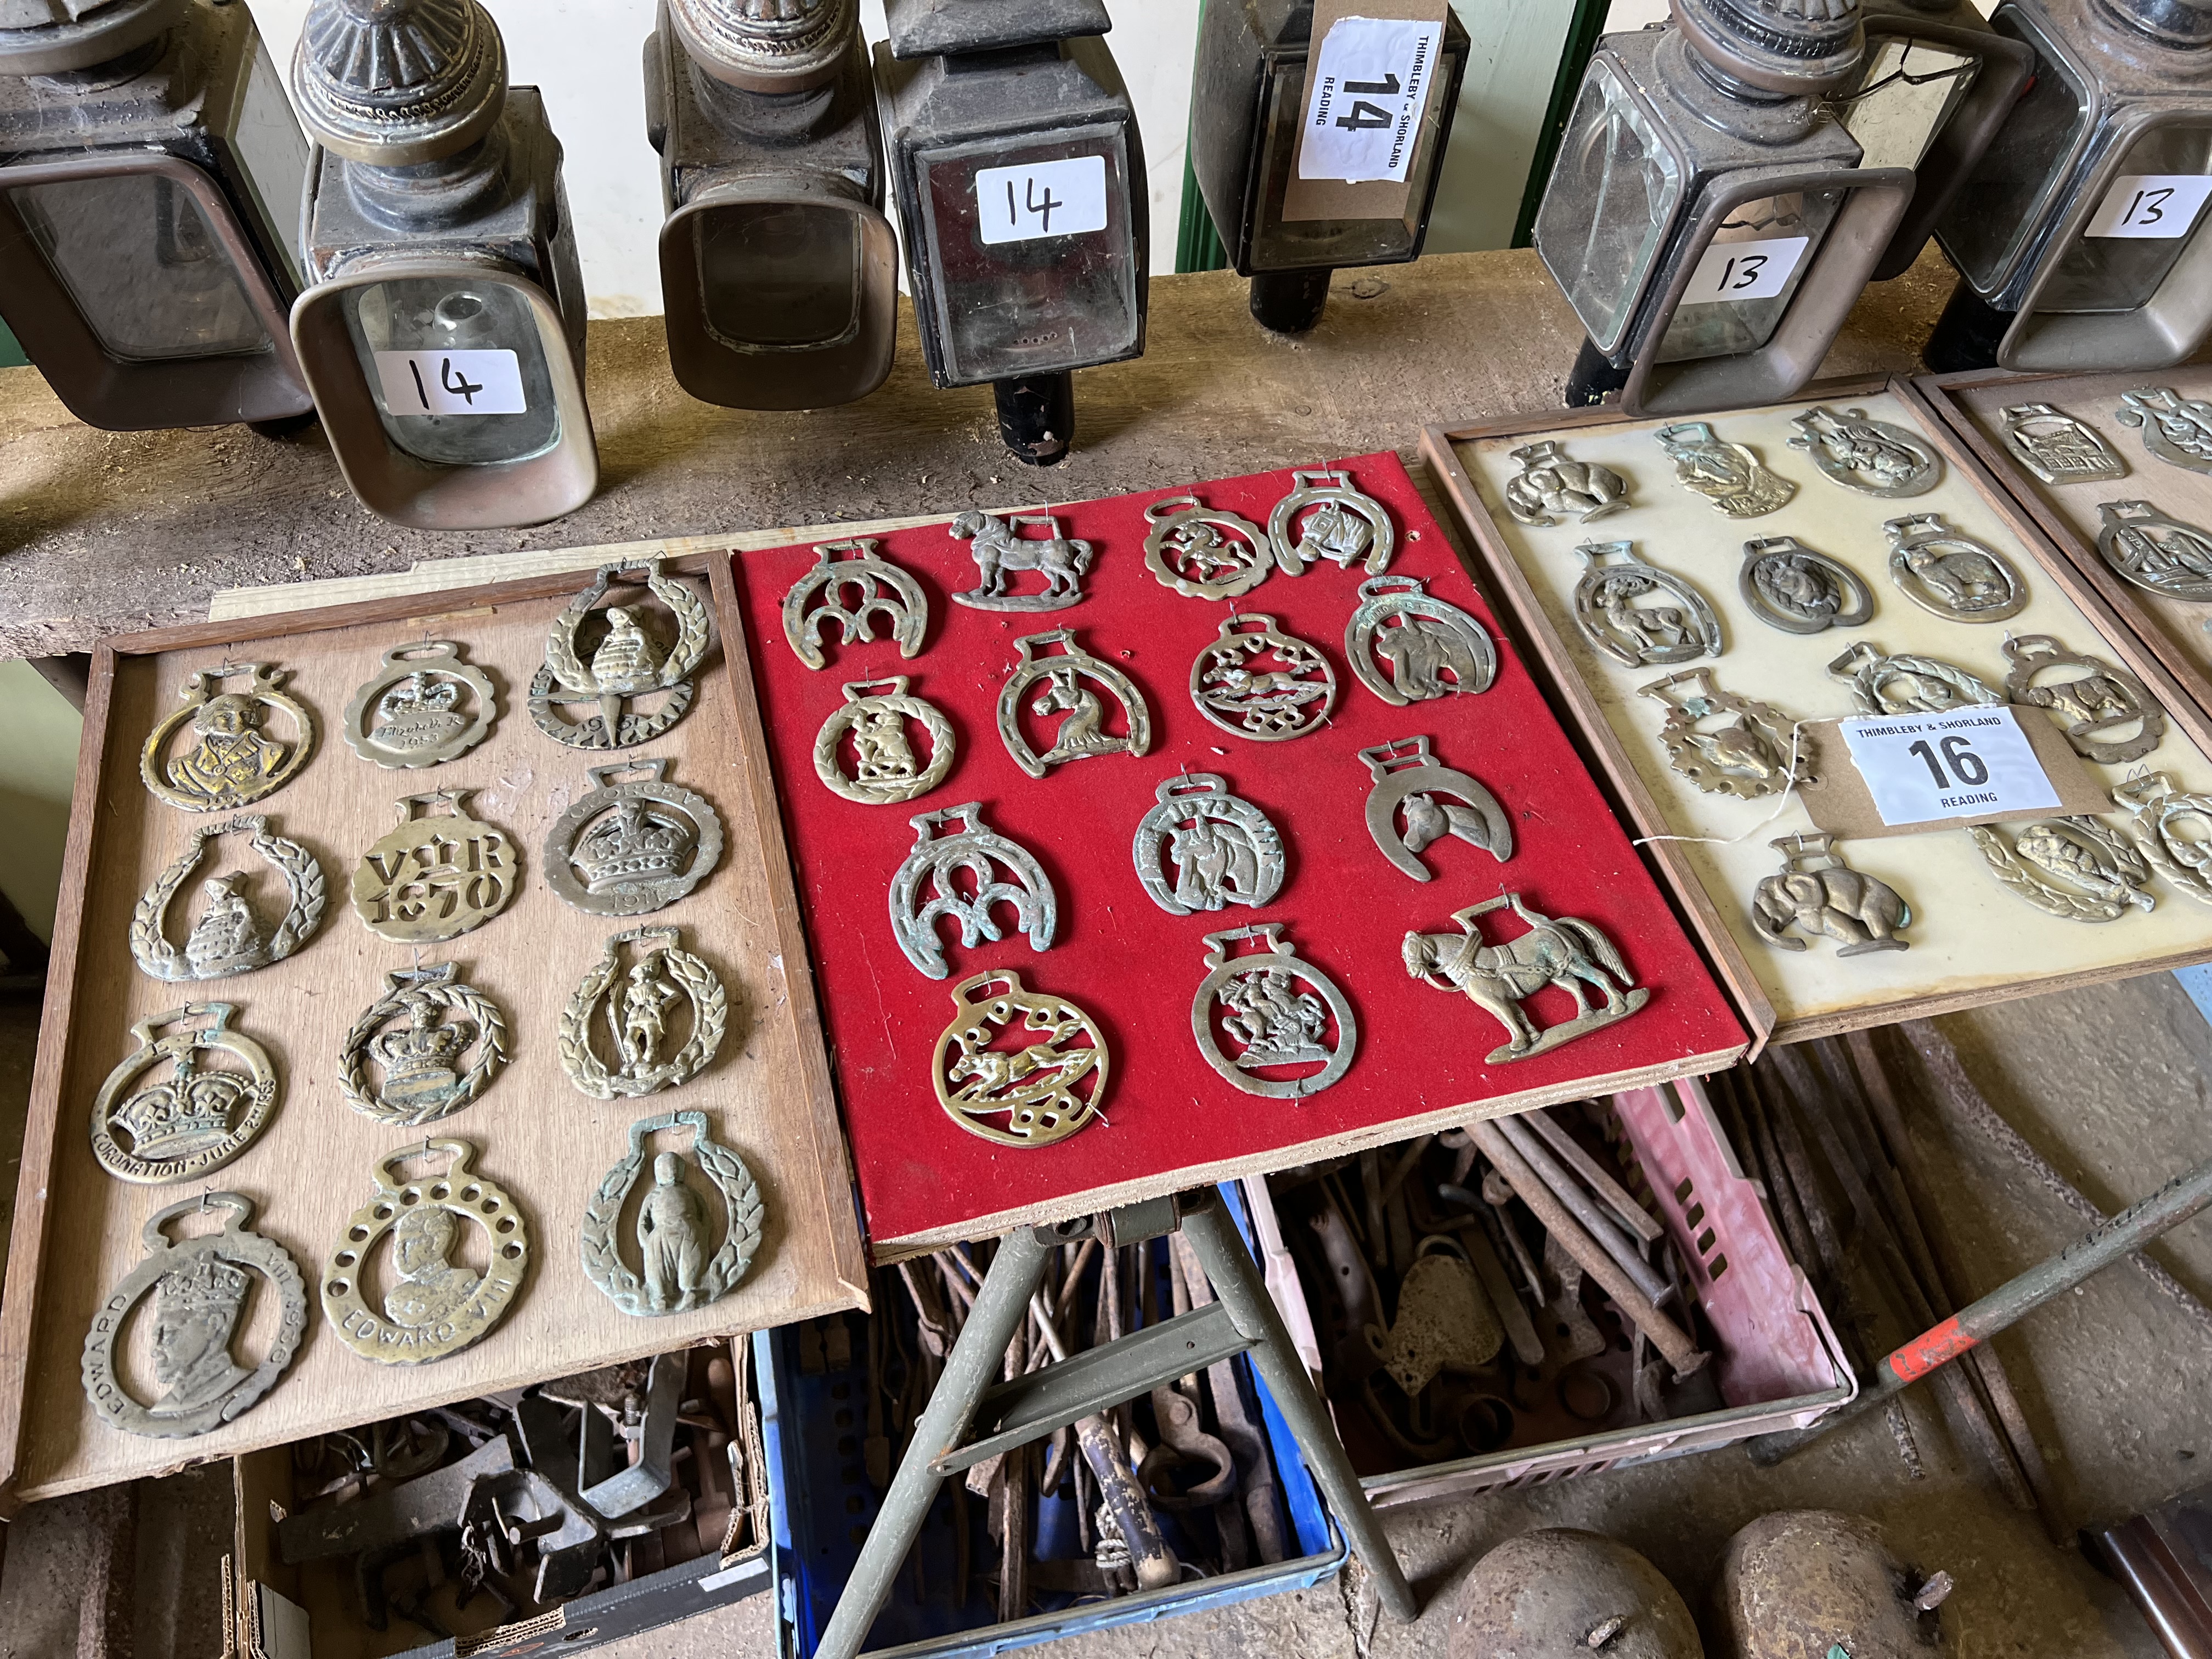 64 horse brasses mounted on wooden boards